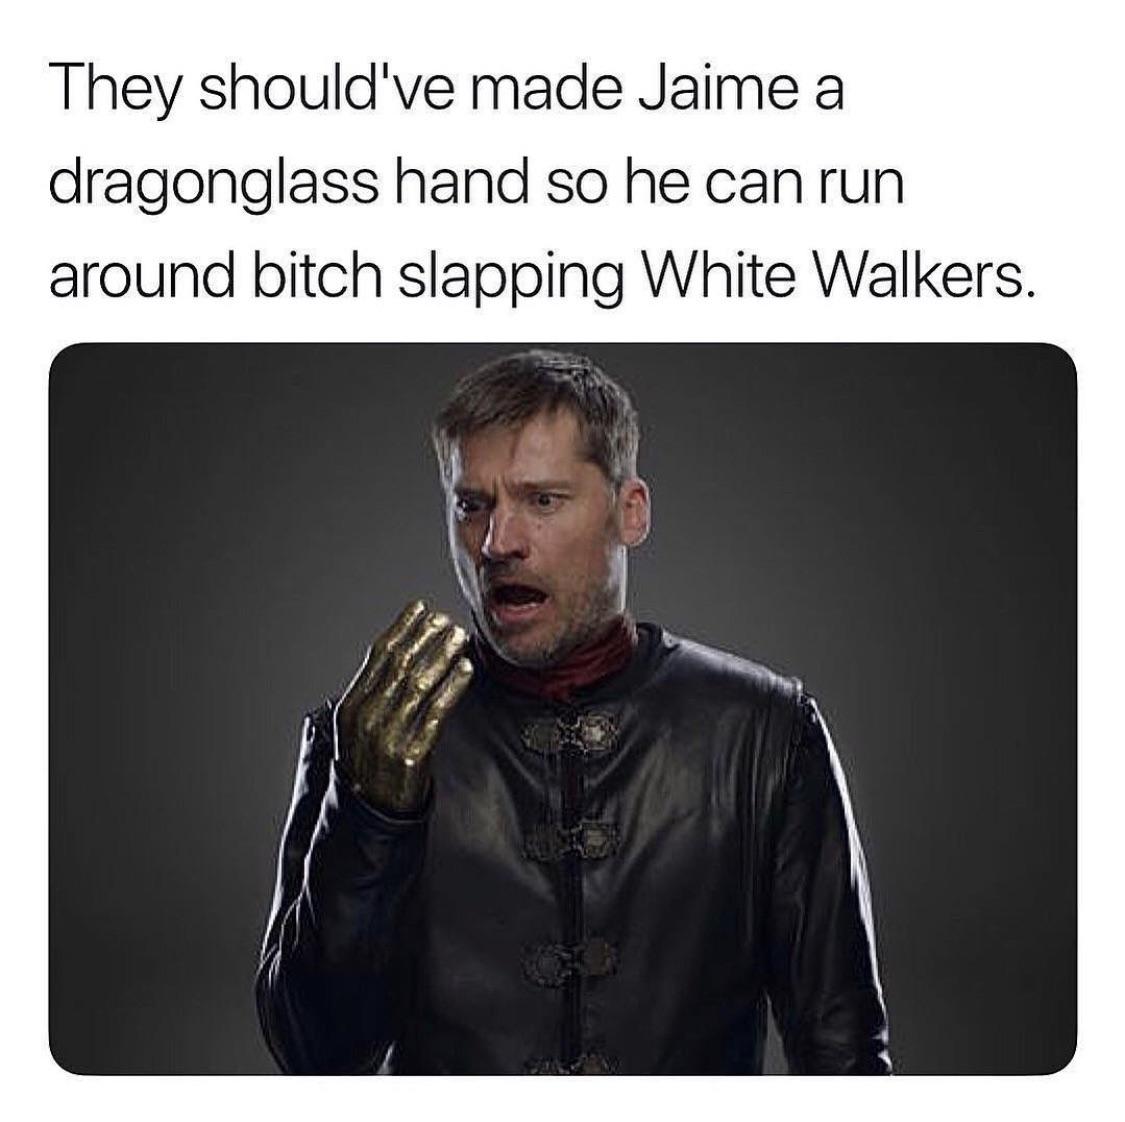 Game of thrones, Jaime, Night King, Jamie, Tyrion, Cersei Game of thrones memes Game of thrones, Jaime, Night King, Jamie, Tyrion, Cersei text: They shouldlve made Jaime a dragonglass hand so he can run around bitch slapping White Walkers. 